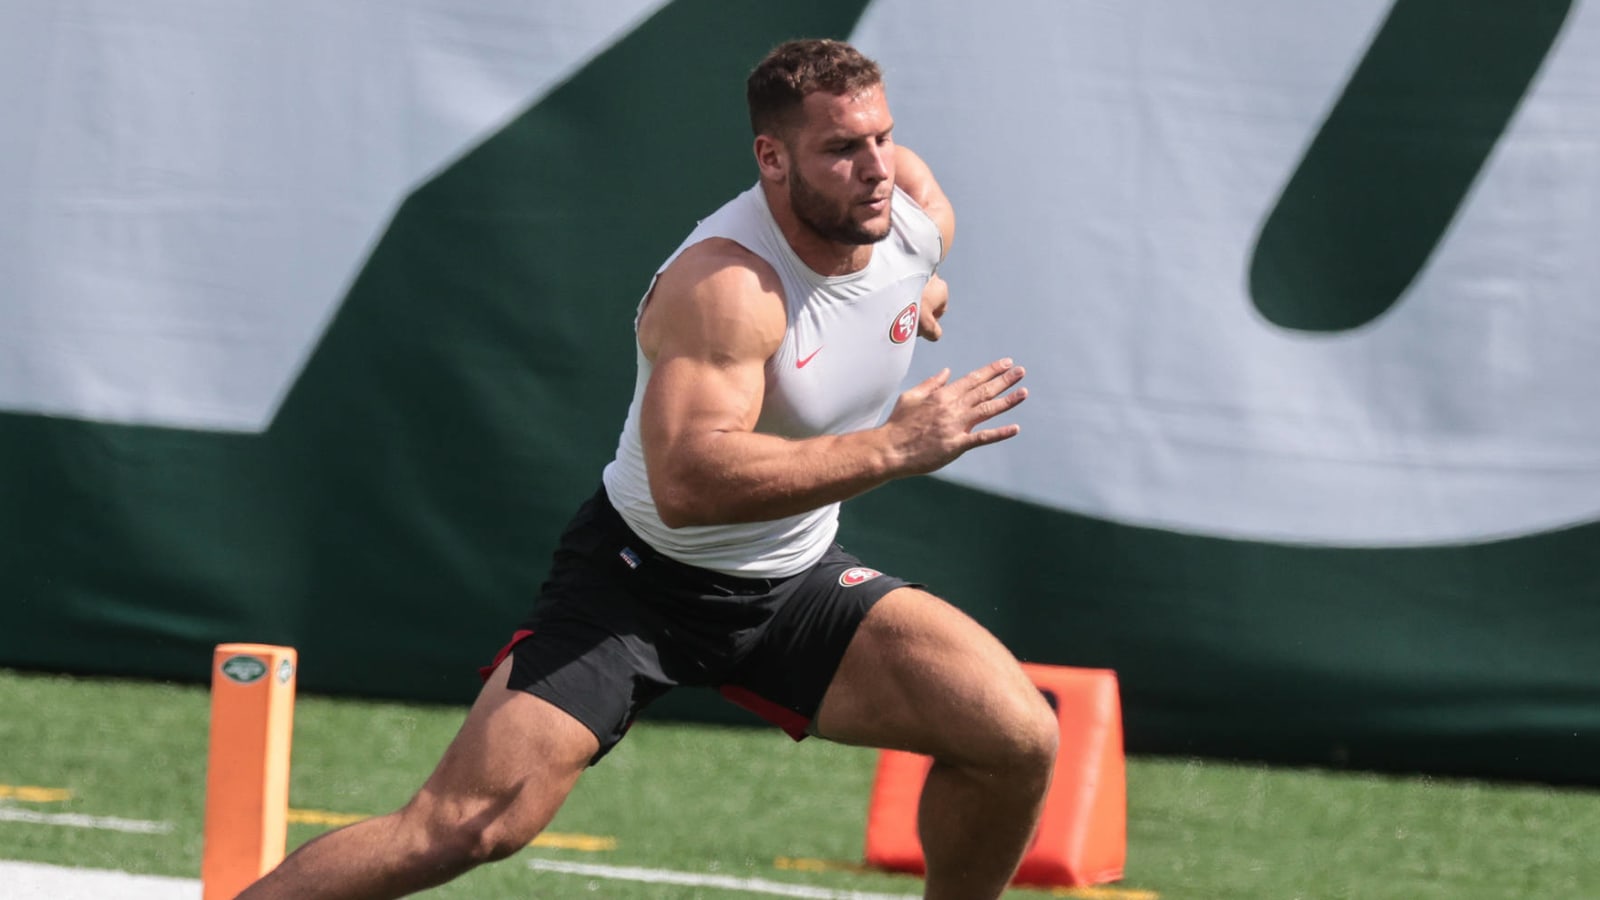 49ers star Nick Bosa has a burst fueled by sweat, sacrifice and a